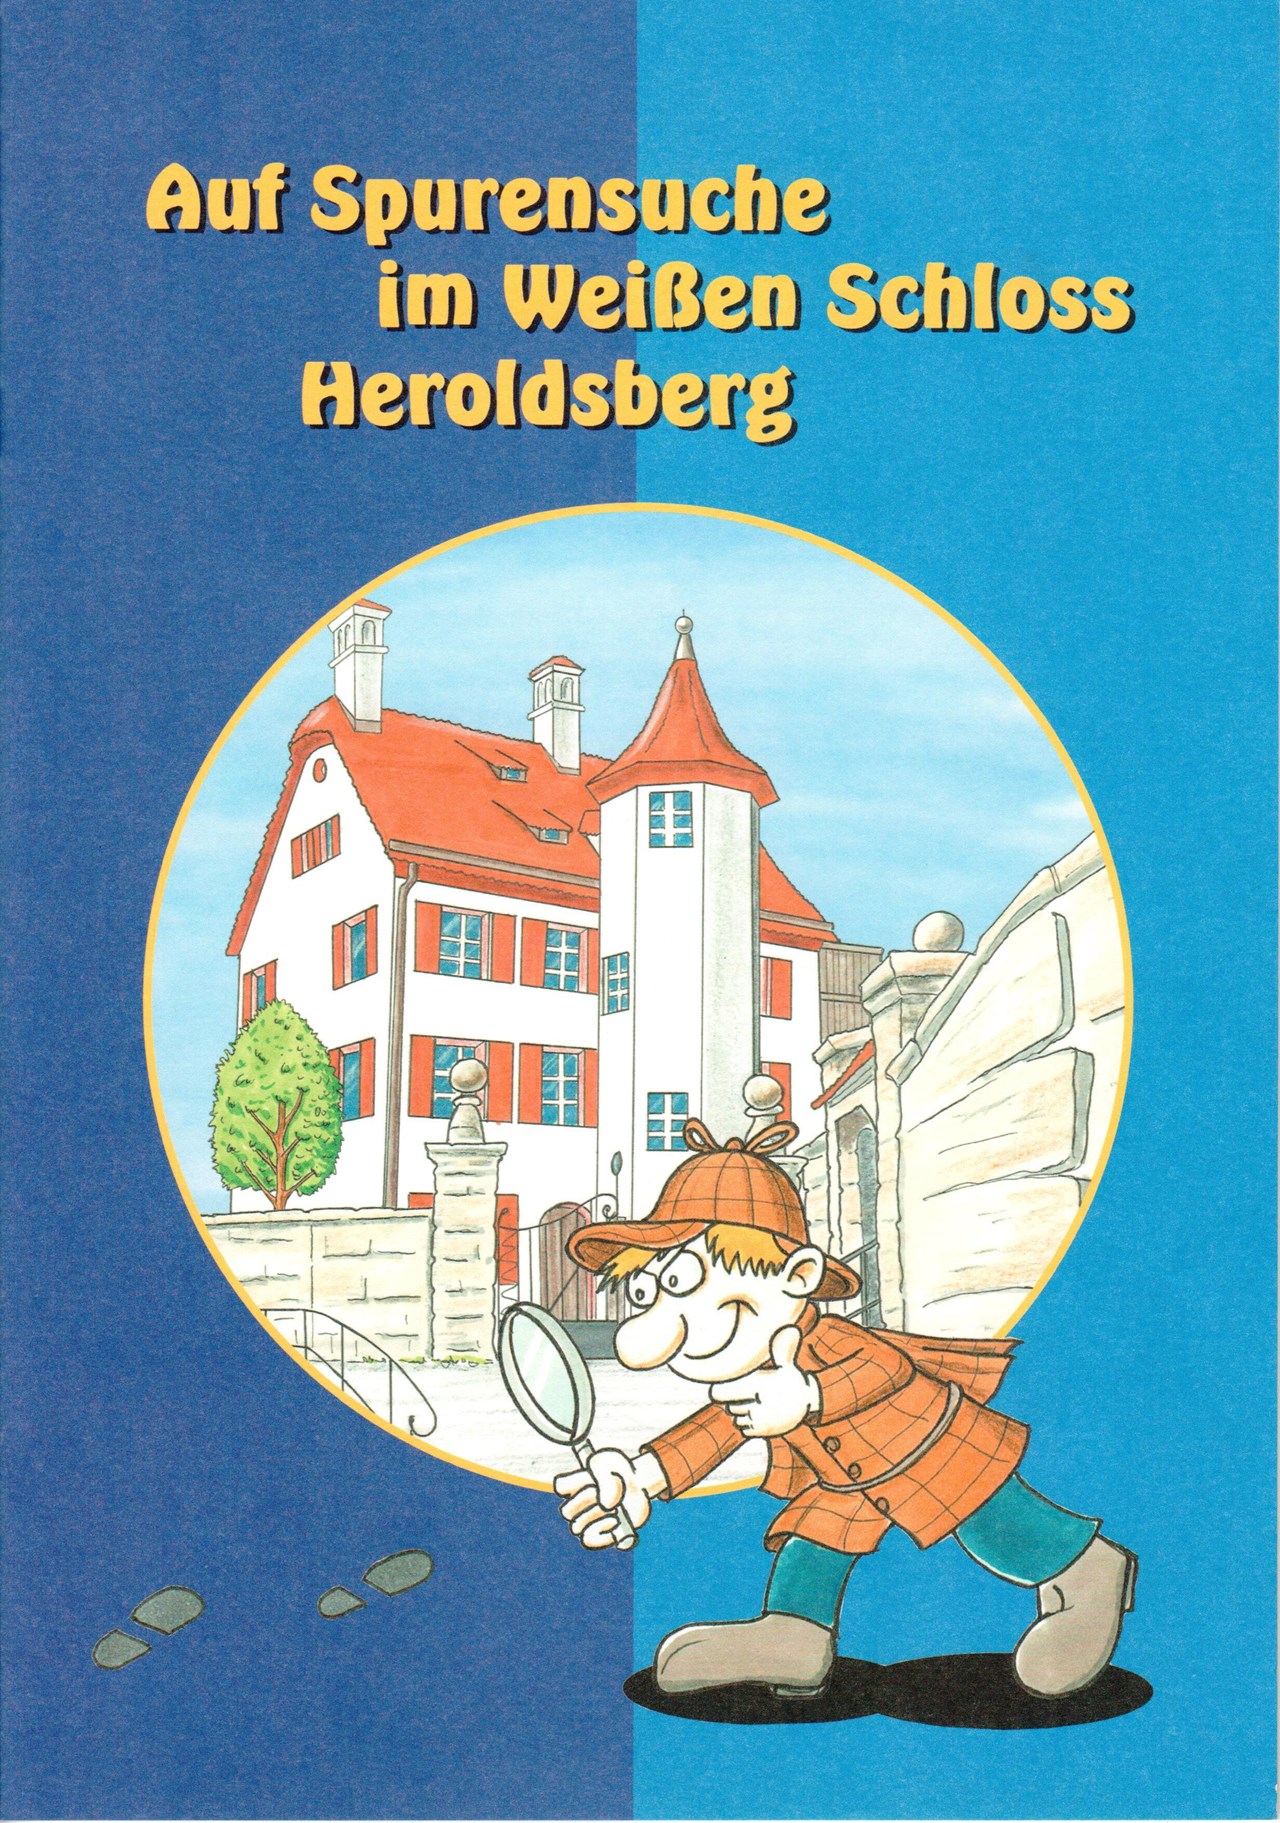 Weißes Schloss Heroldsberg Highlights at the destination Searching for clues in the White Castle of Heroldsberg